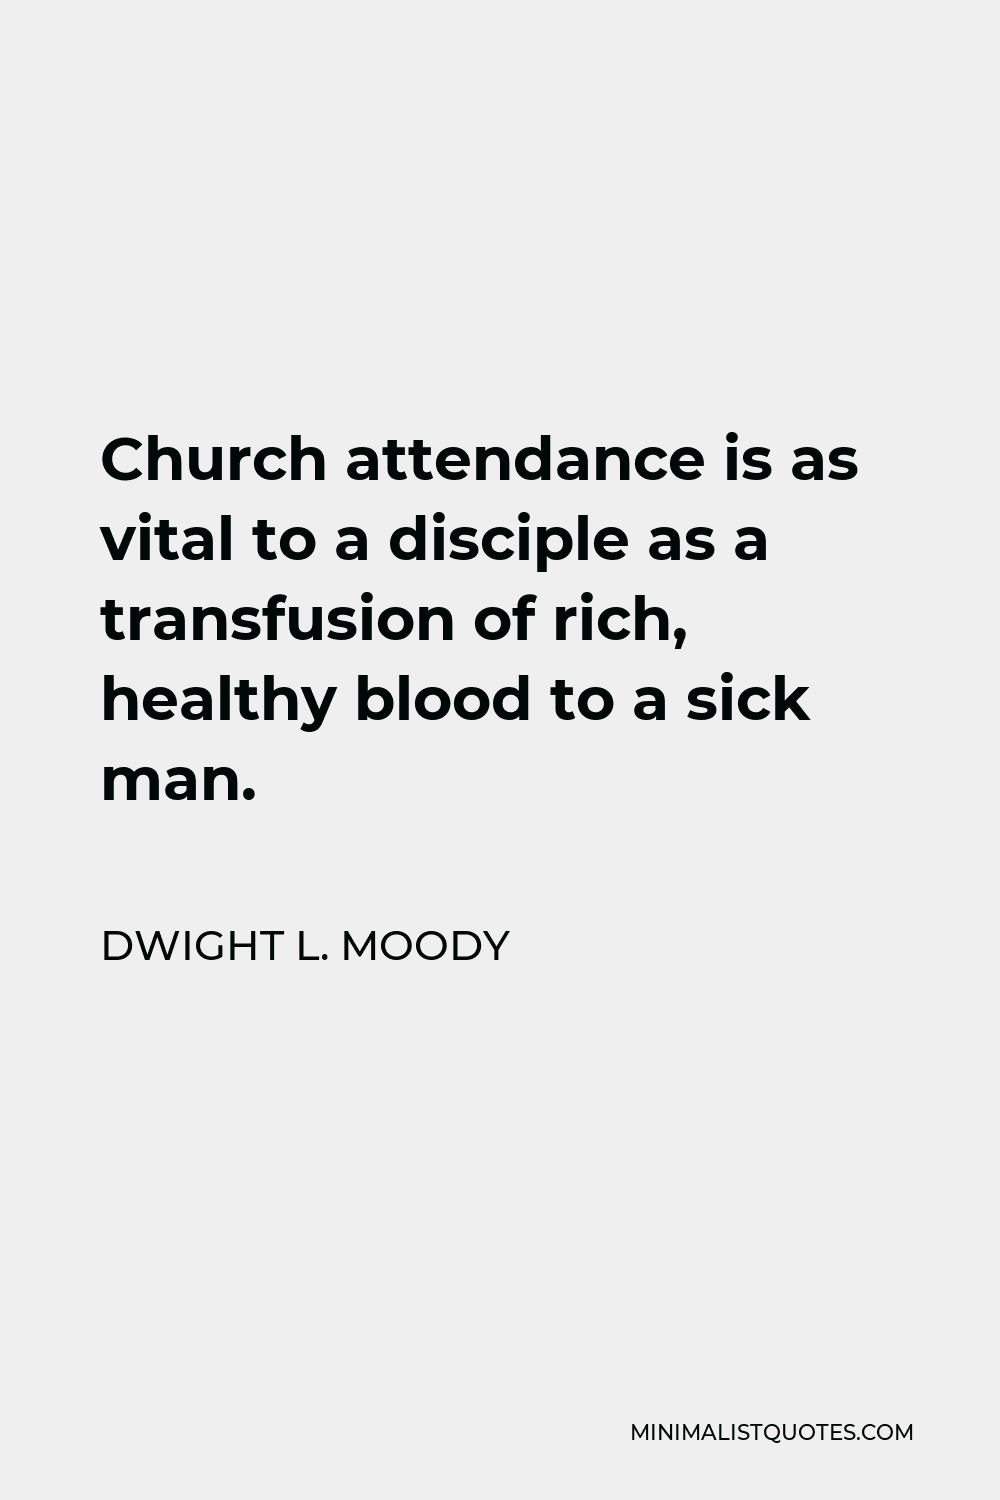 Dwight L. Moody Quote - Church attendance is as vital to a disciple as a transfusion of rich, healthy blood to a sick man.